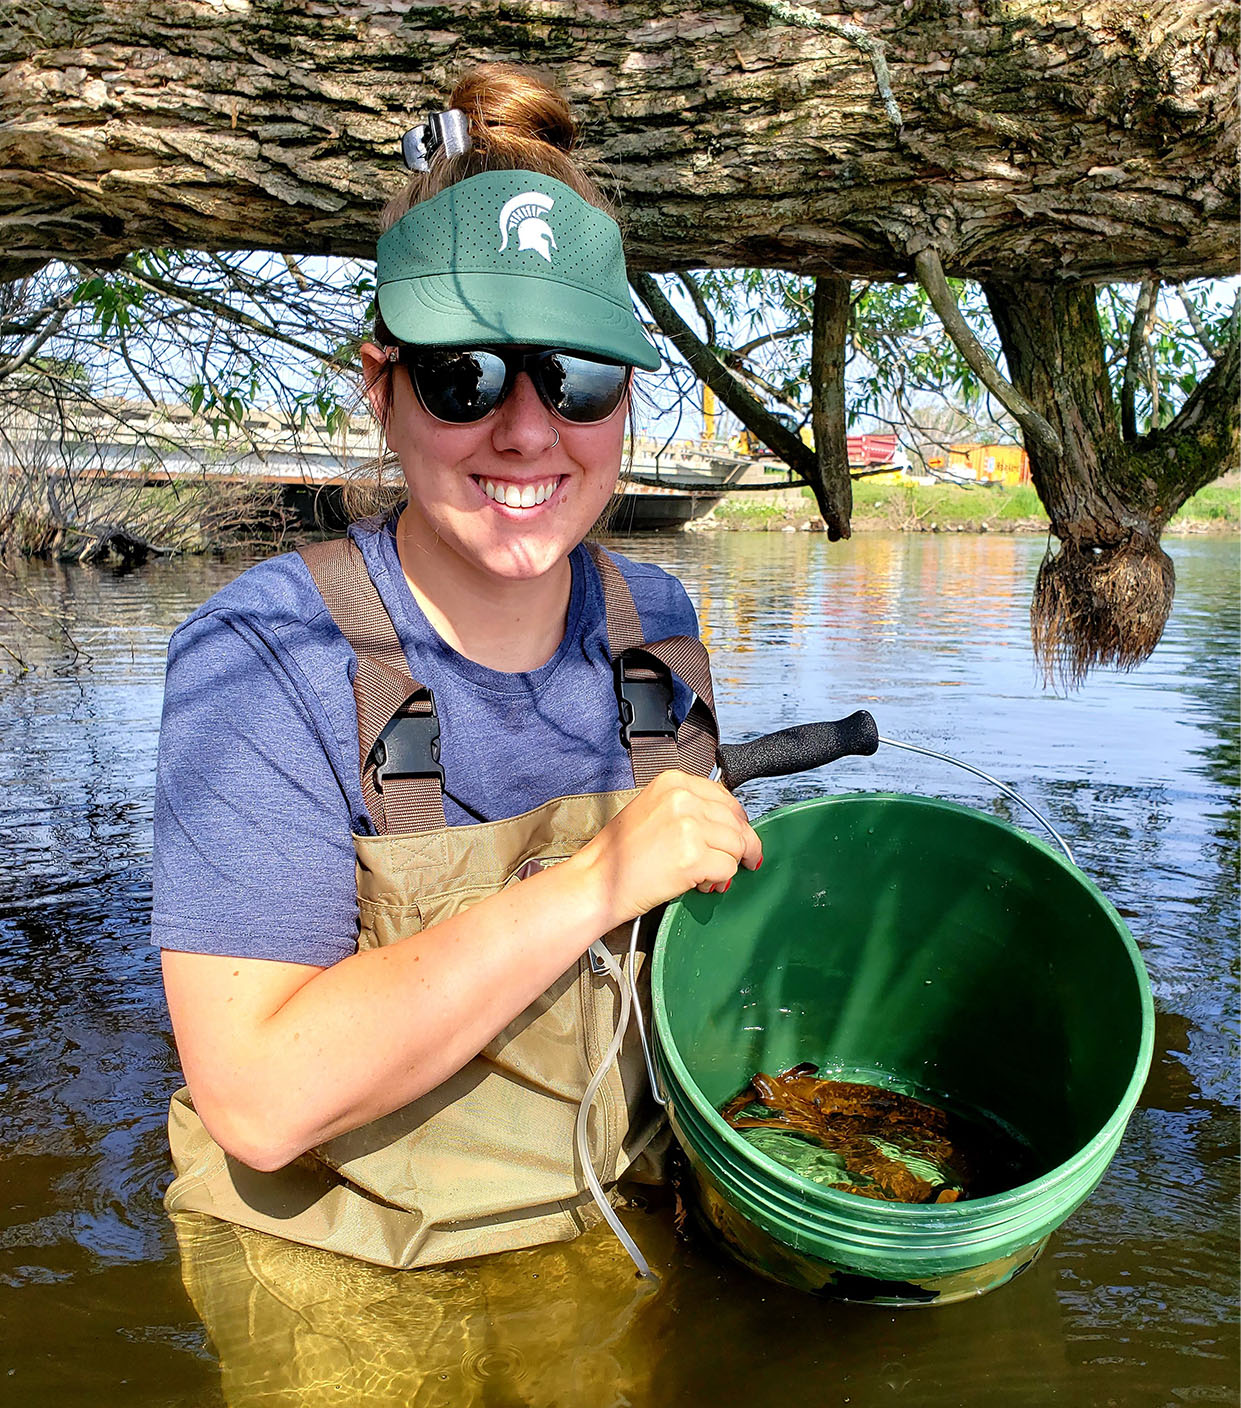 Kandace Griffin holding a bucket of sea lampreys